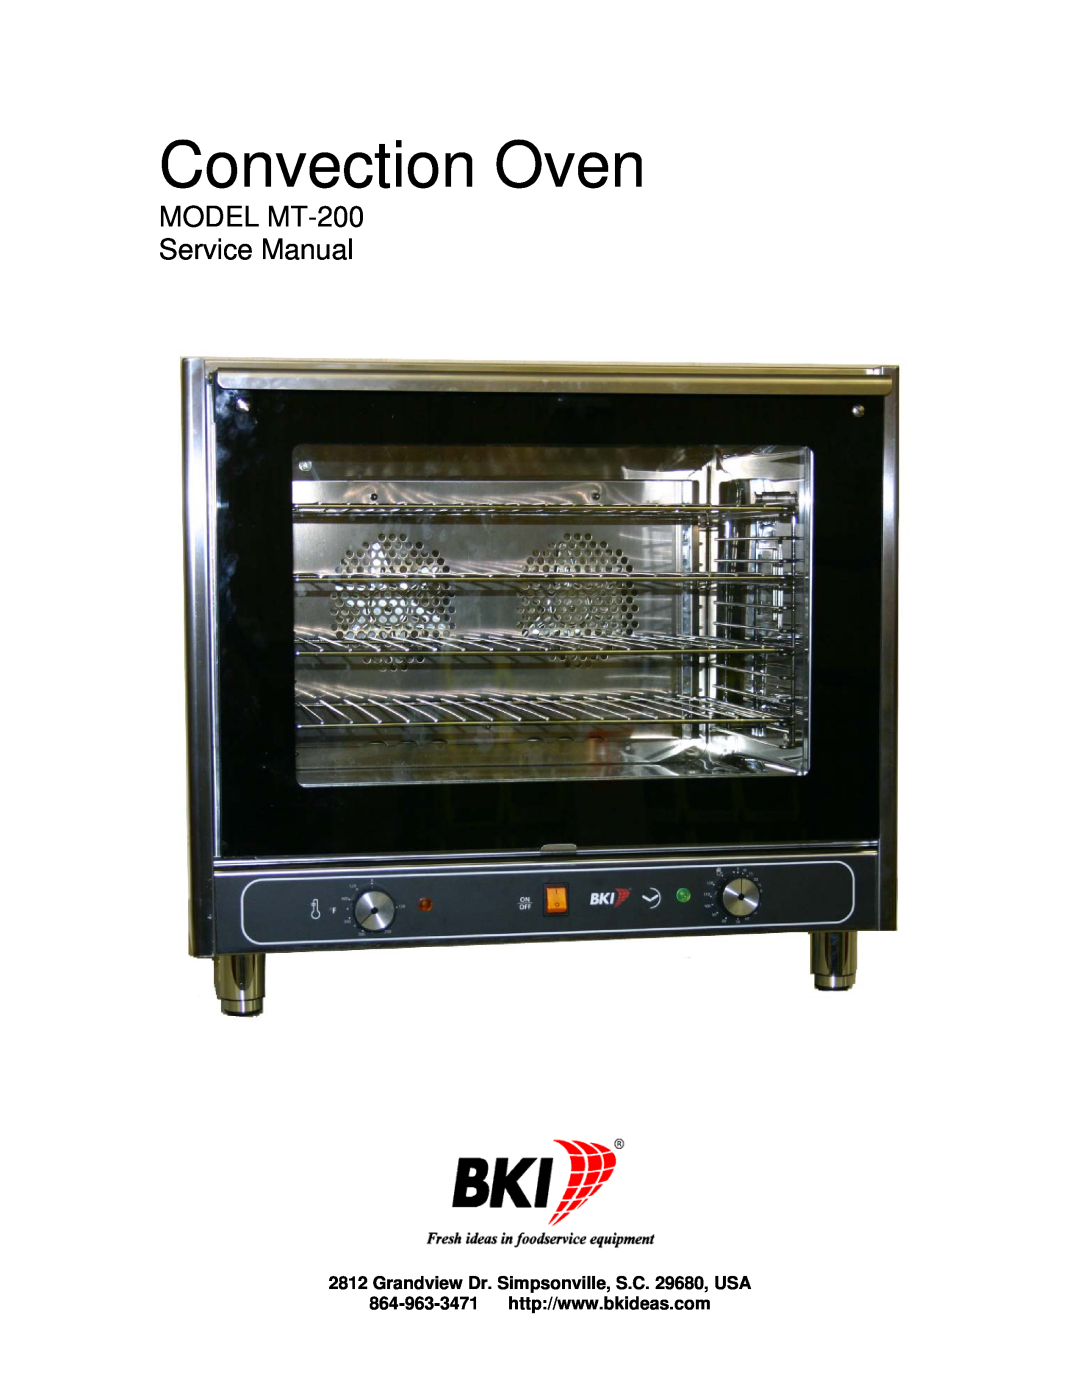 Bakers Pride Oven MT-200 service manual Grandview Dr. Simpsonville, S.C. 29680, USA, Convection Oven 